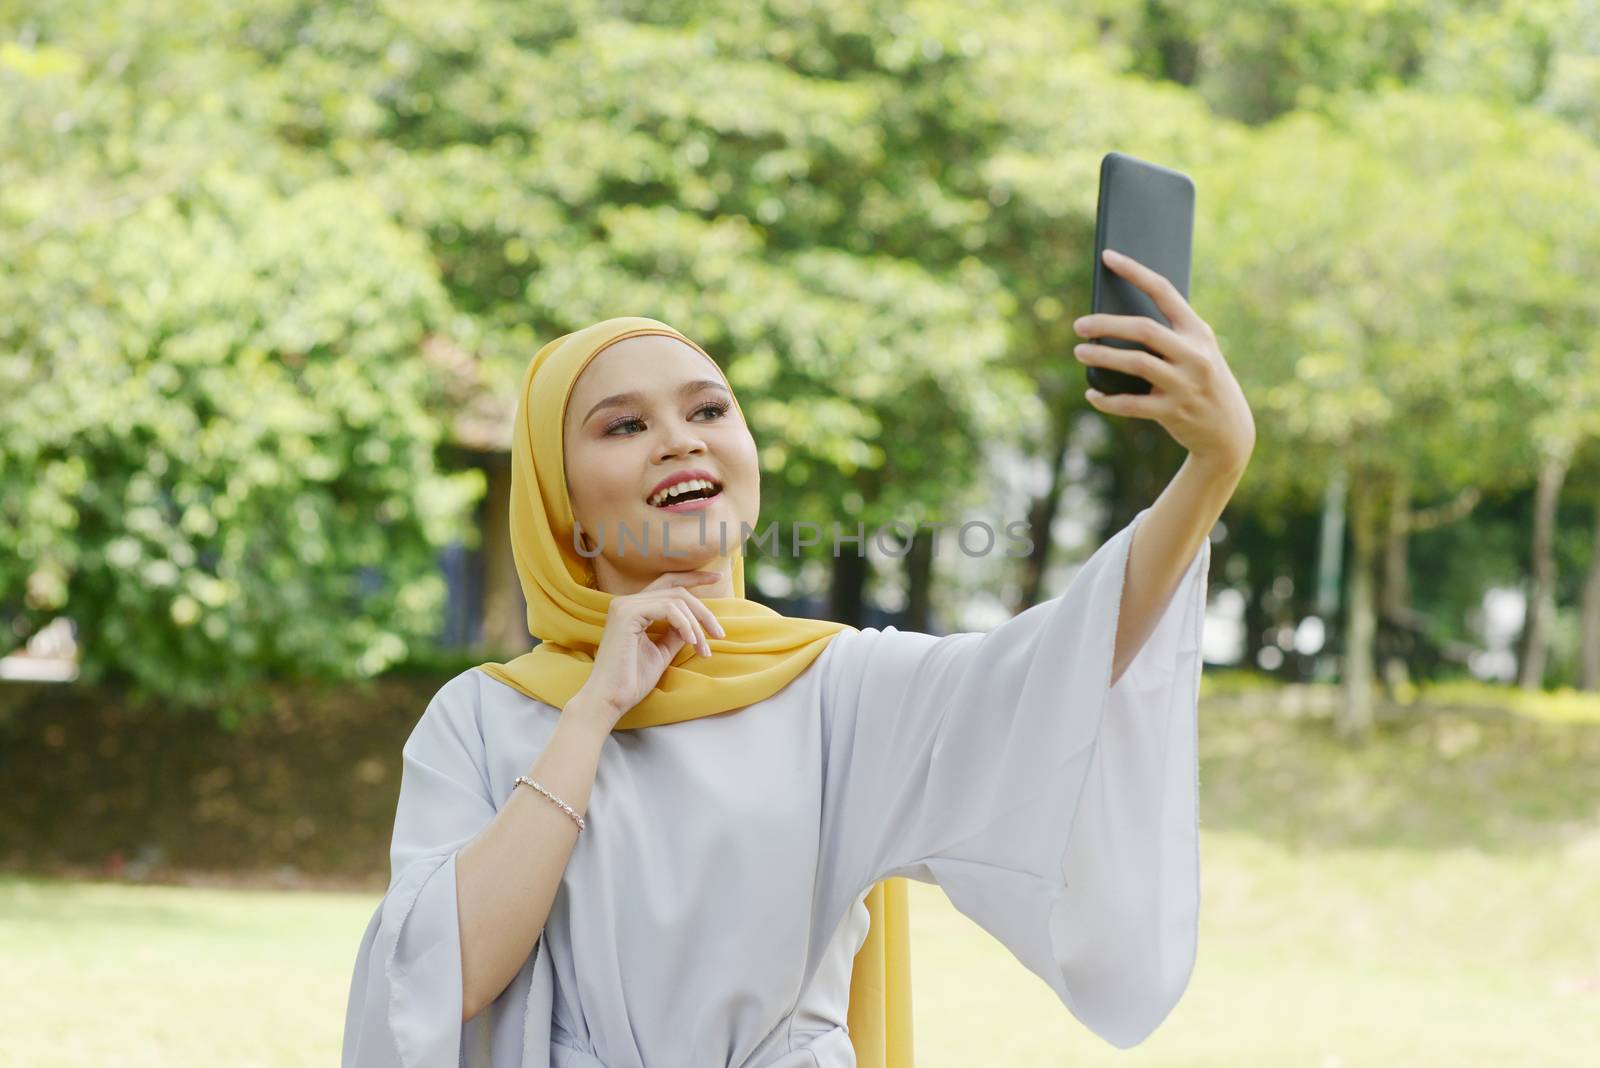 Portrait of cheerful Muslim girl using smartphone, smiling at outdoor.